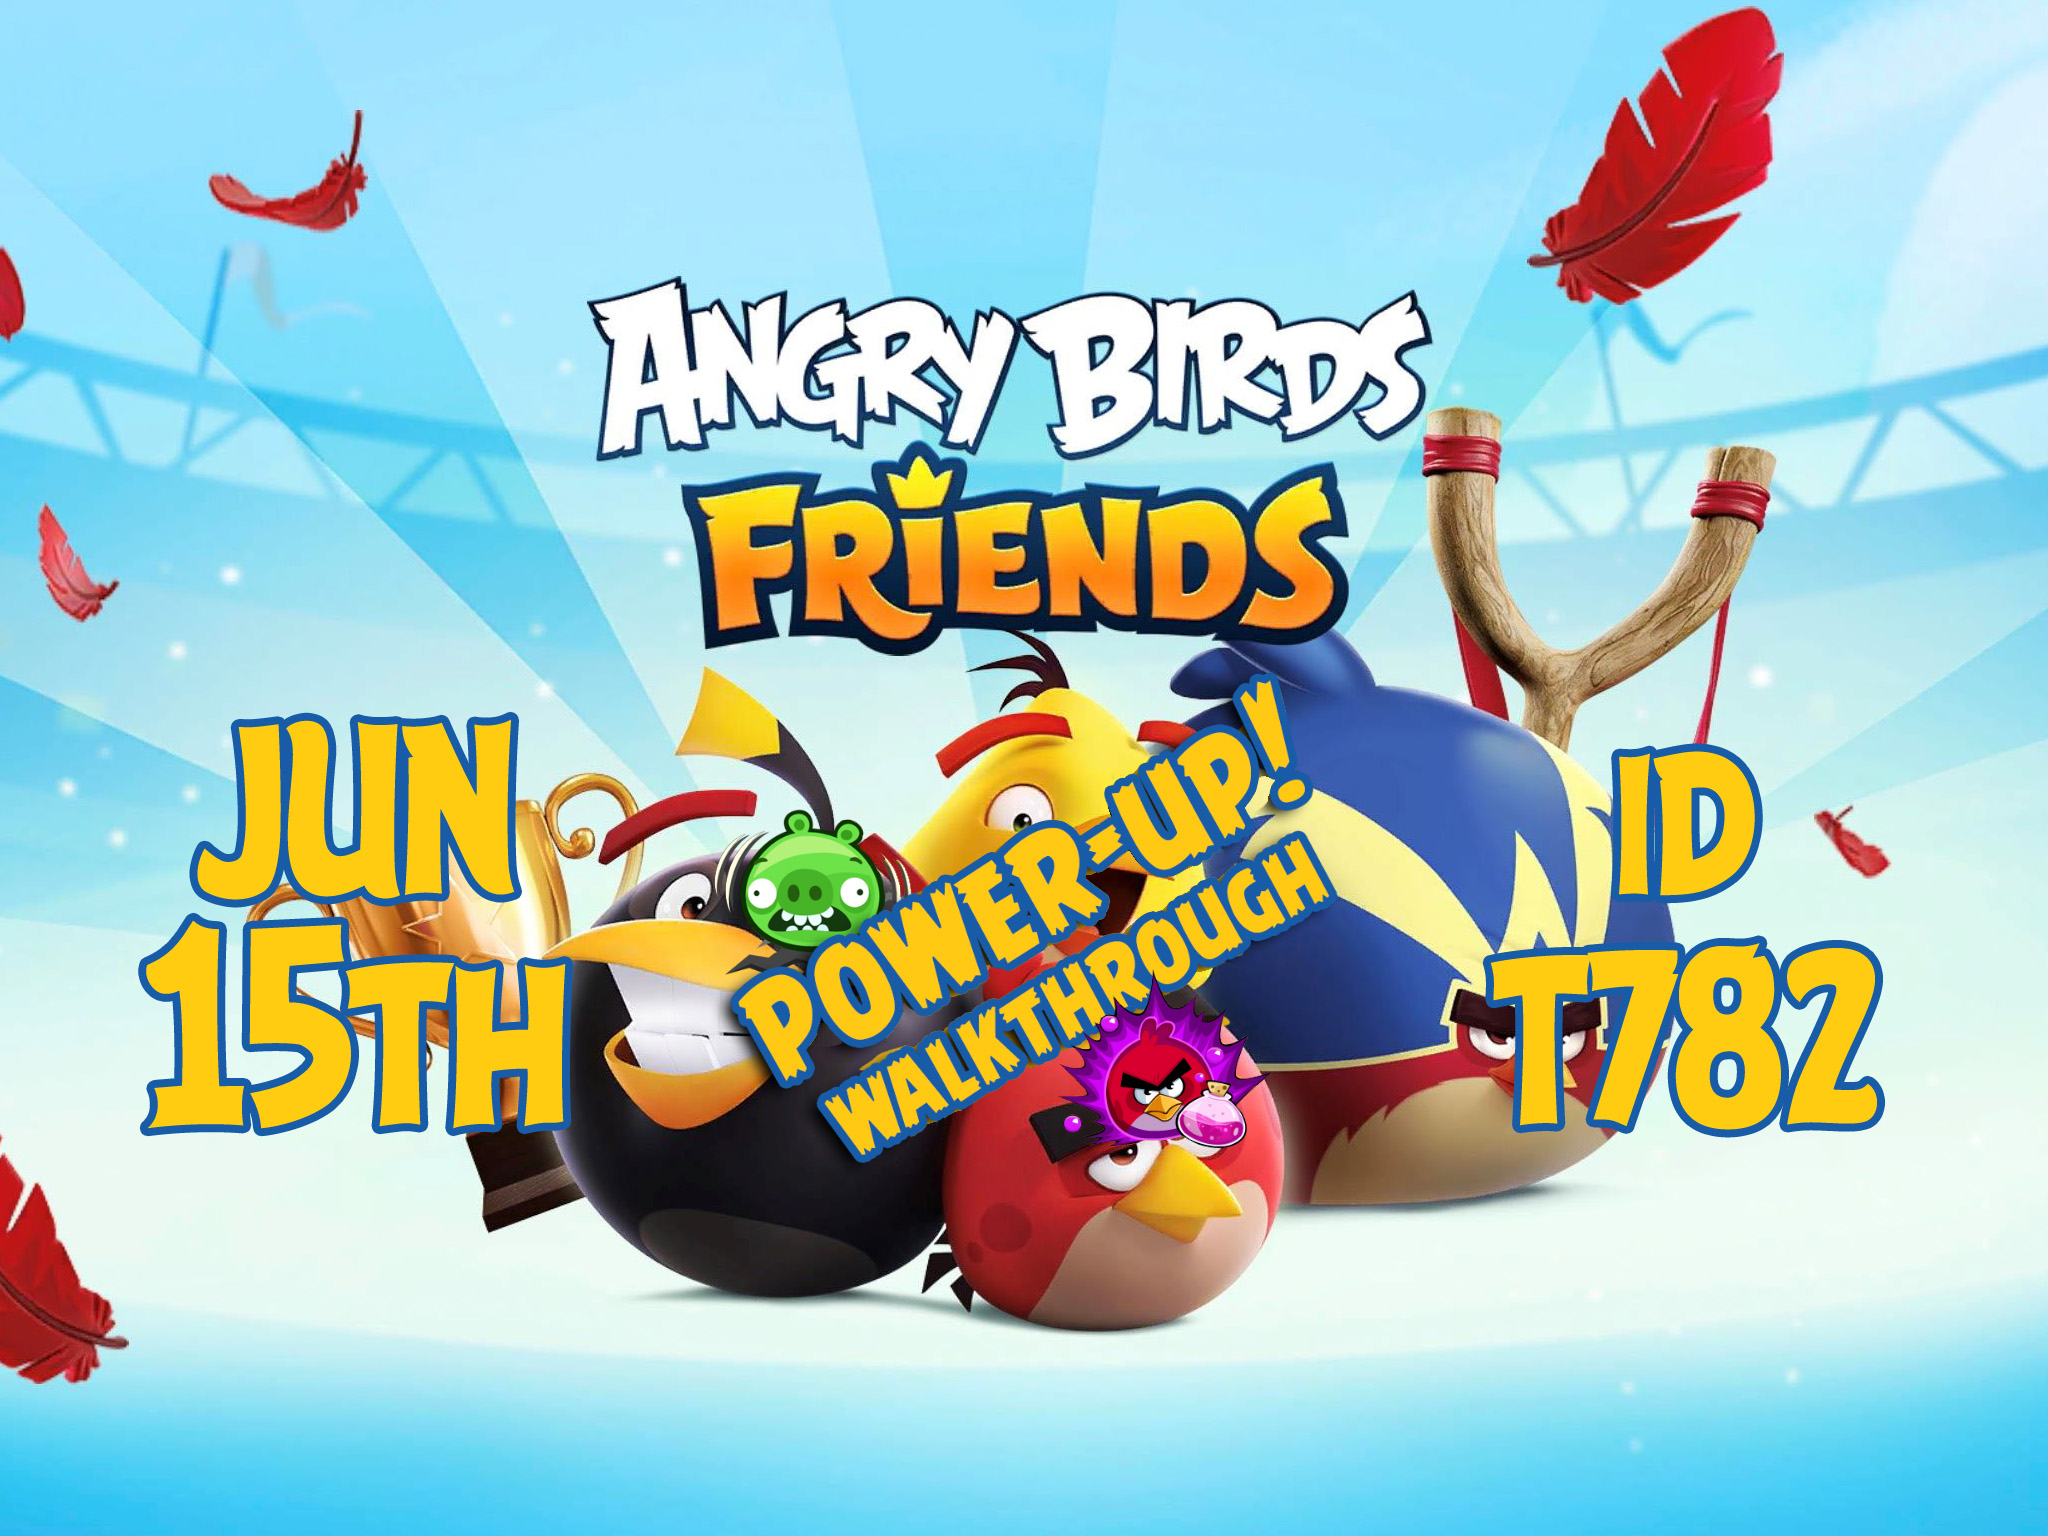 Angry-Birds-Friends-Tournament-T782-Feature-Image-PU